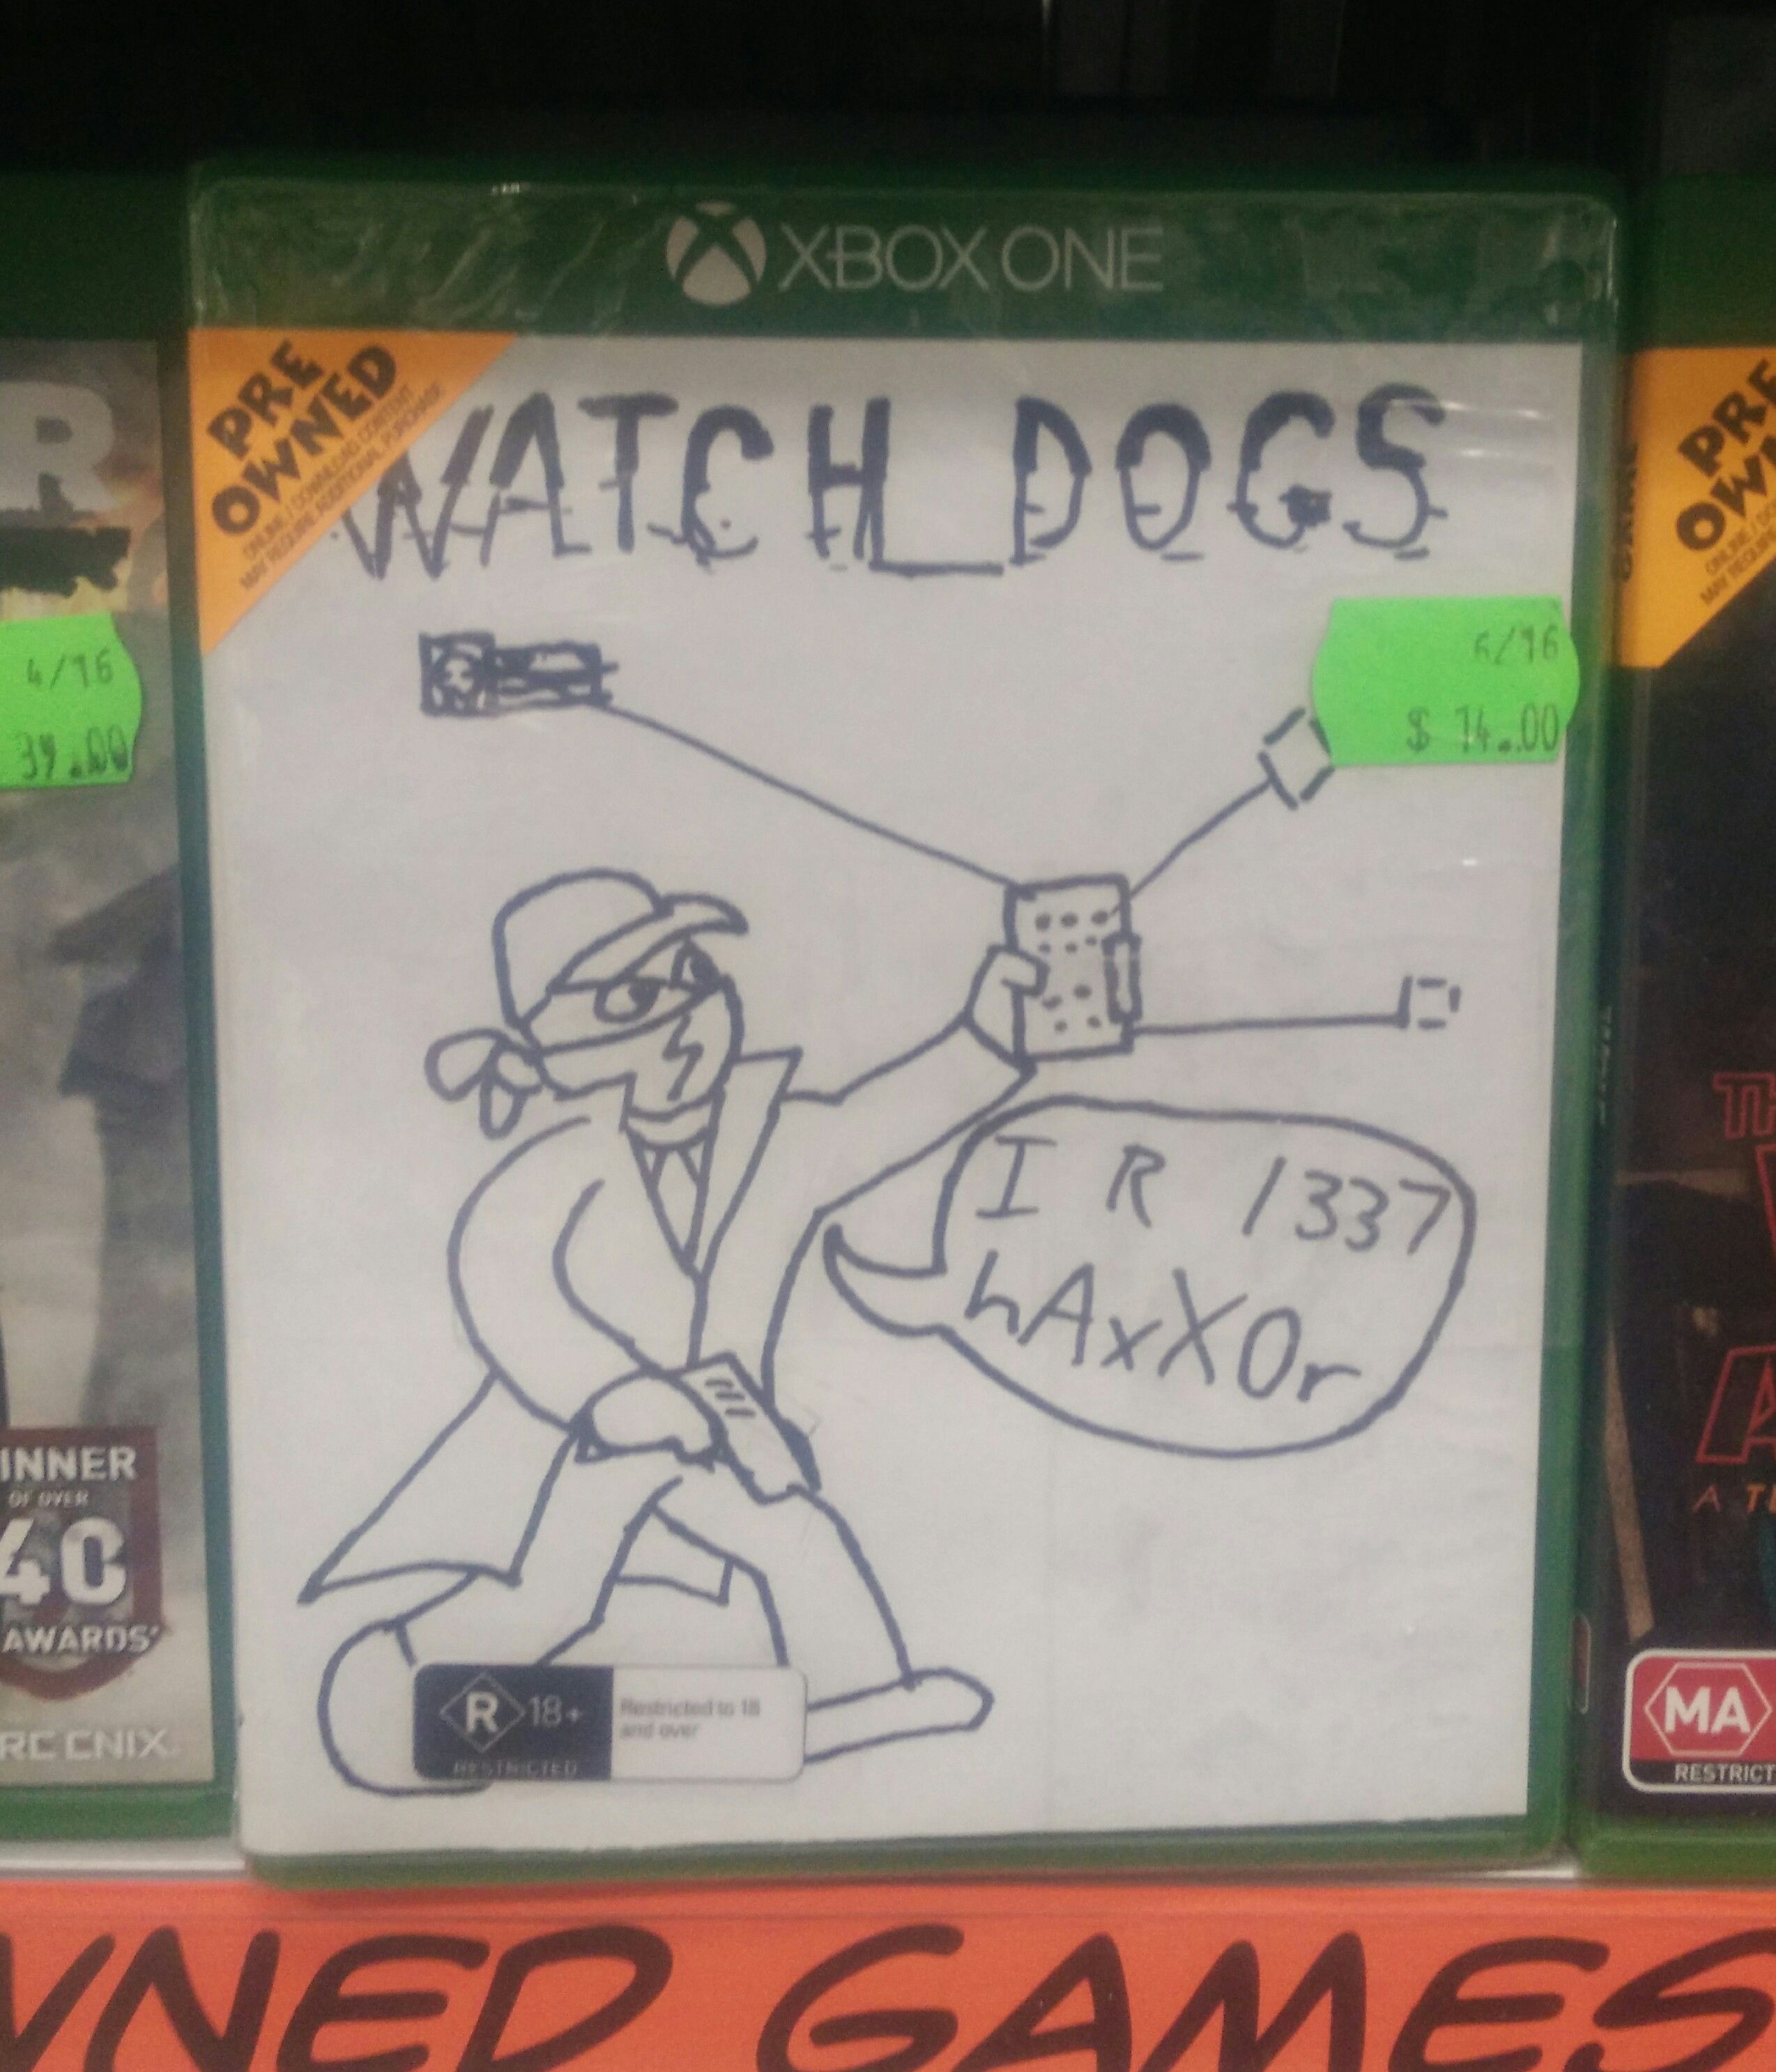 Found this at my local electronics store...